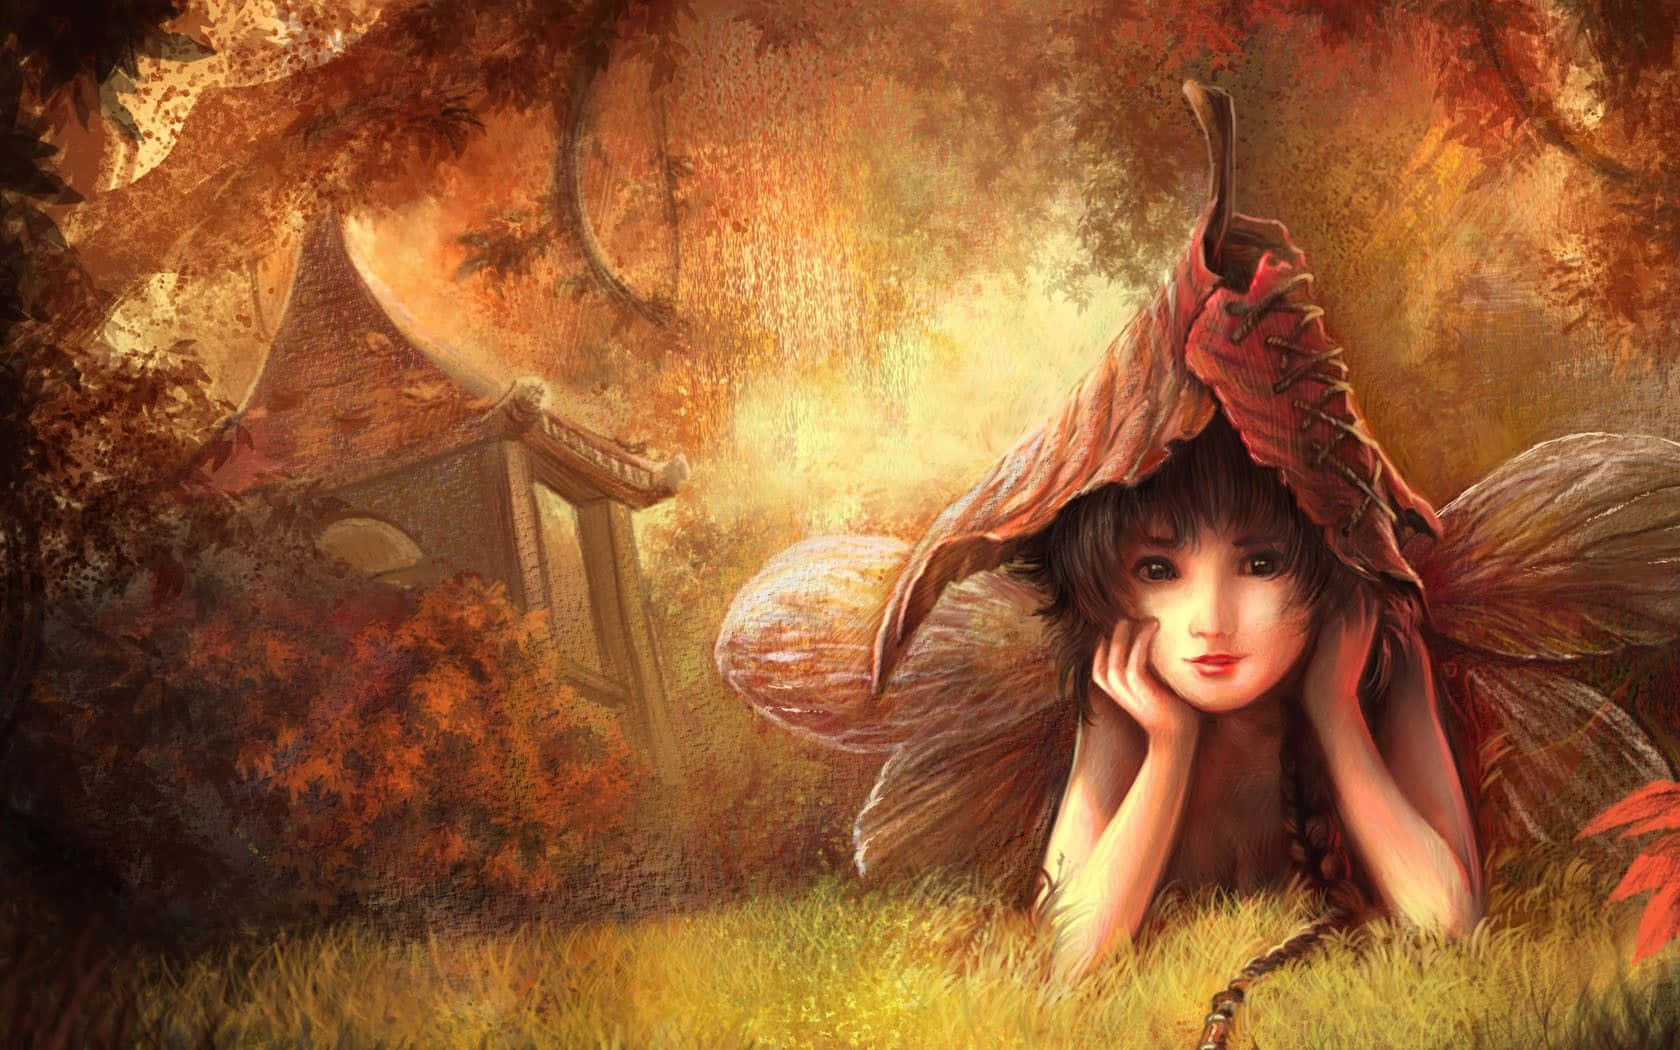 A charming little fairy spreading magical stardust in an enchanted forest Wallpaper